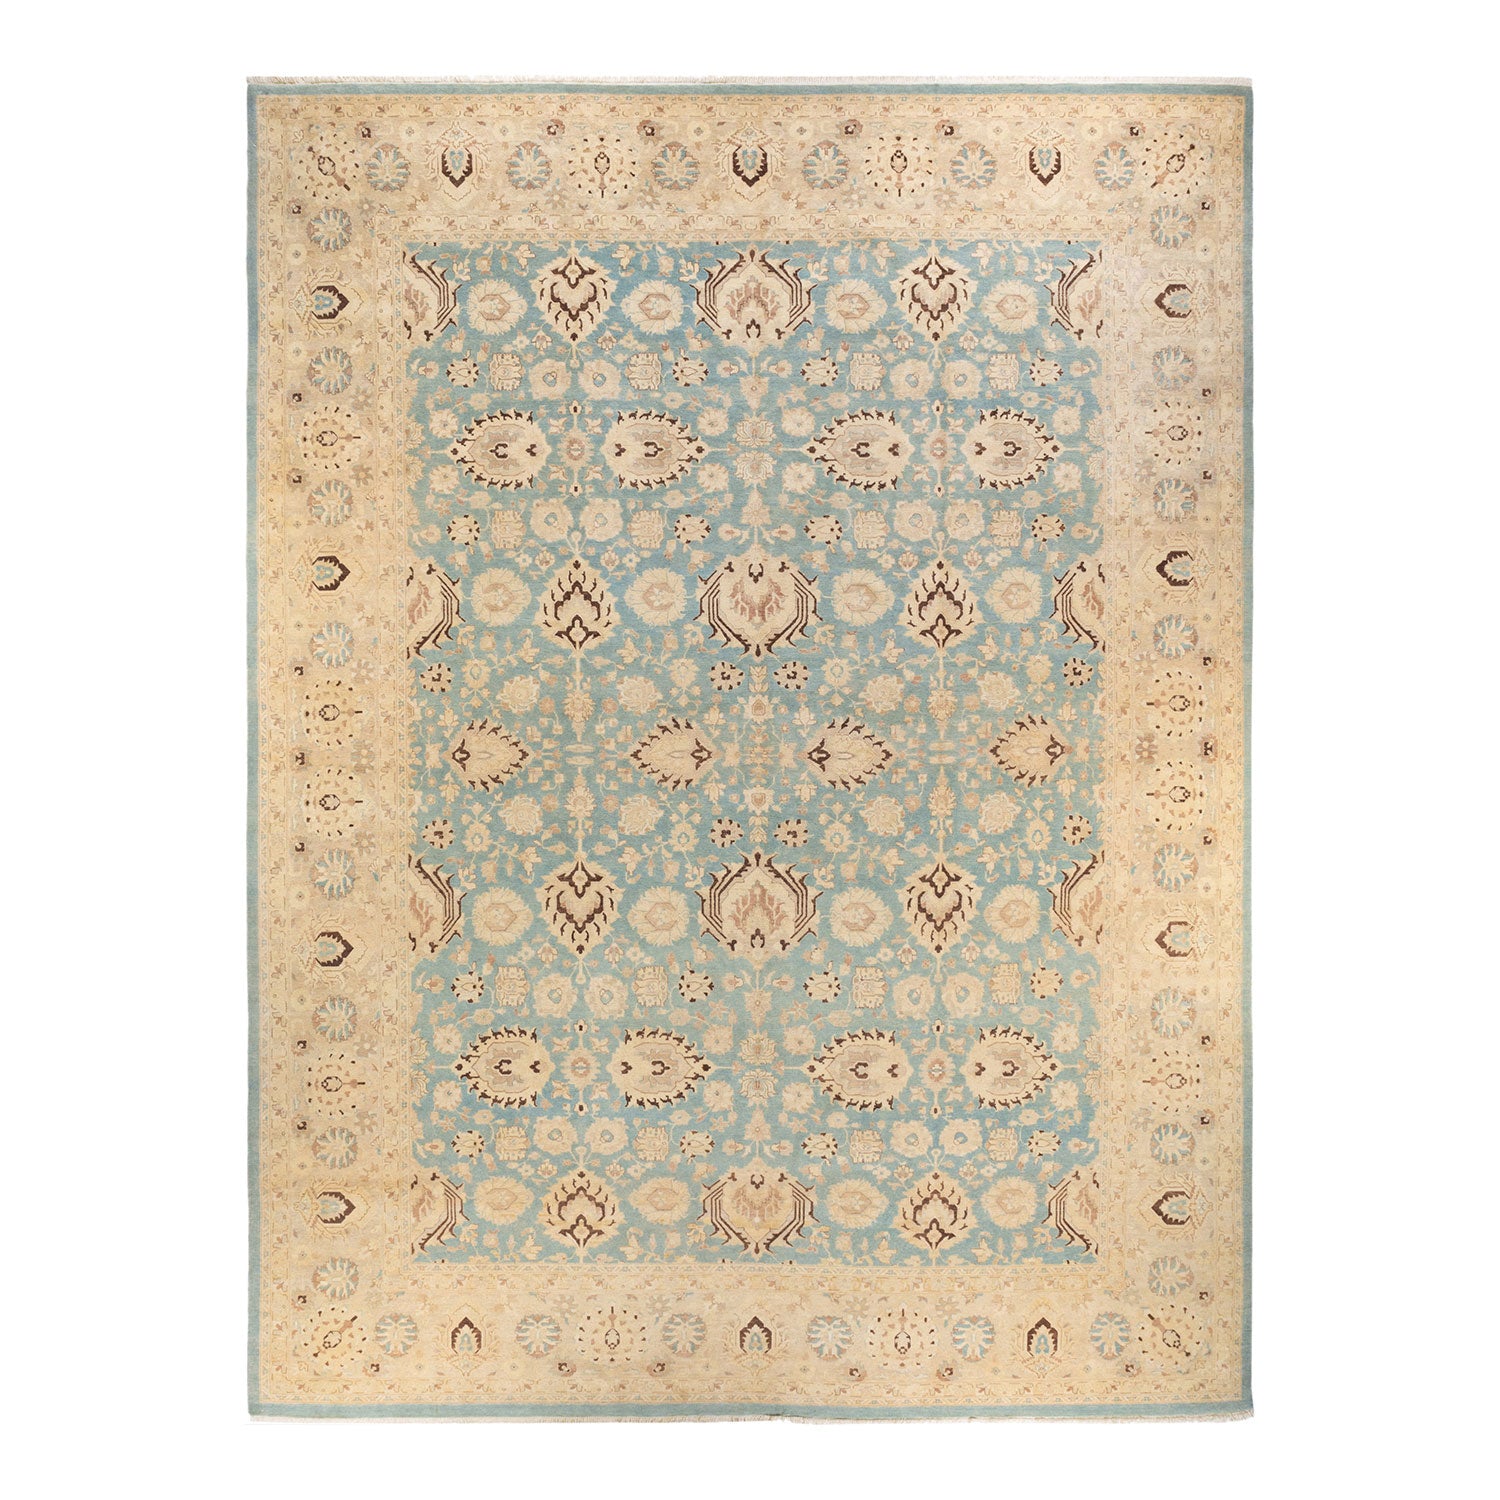 Intricate rectangular rug with symmetrical geometric and floral motifs.